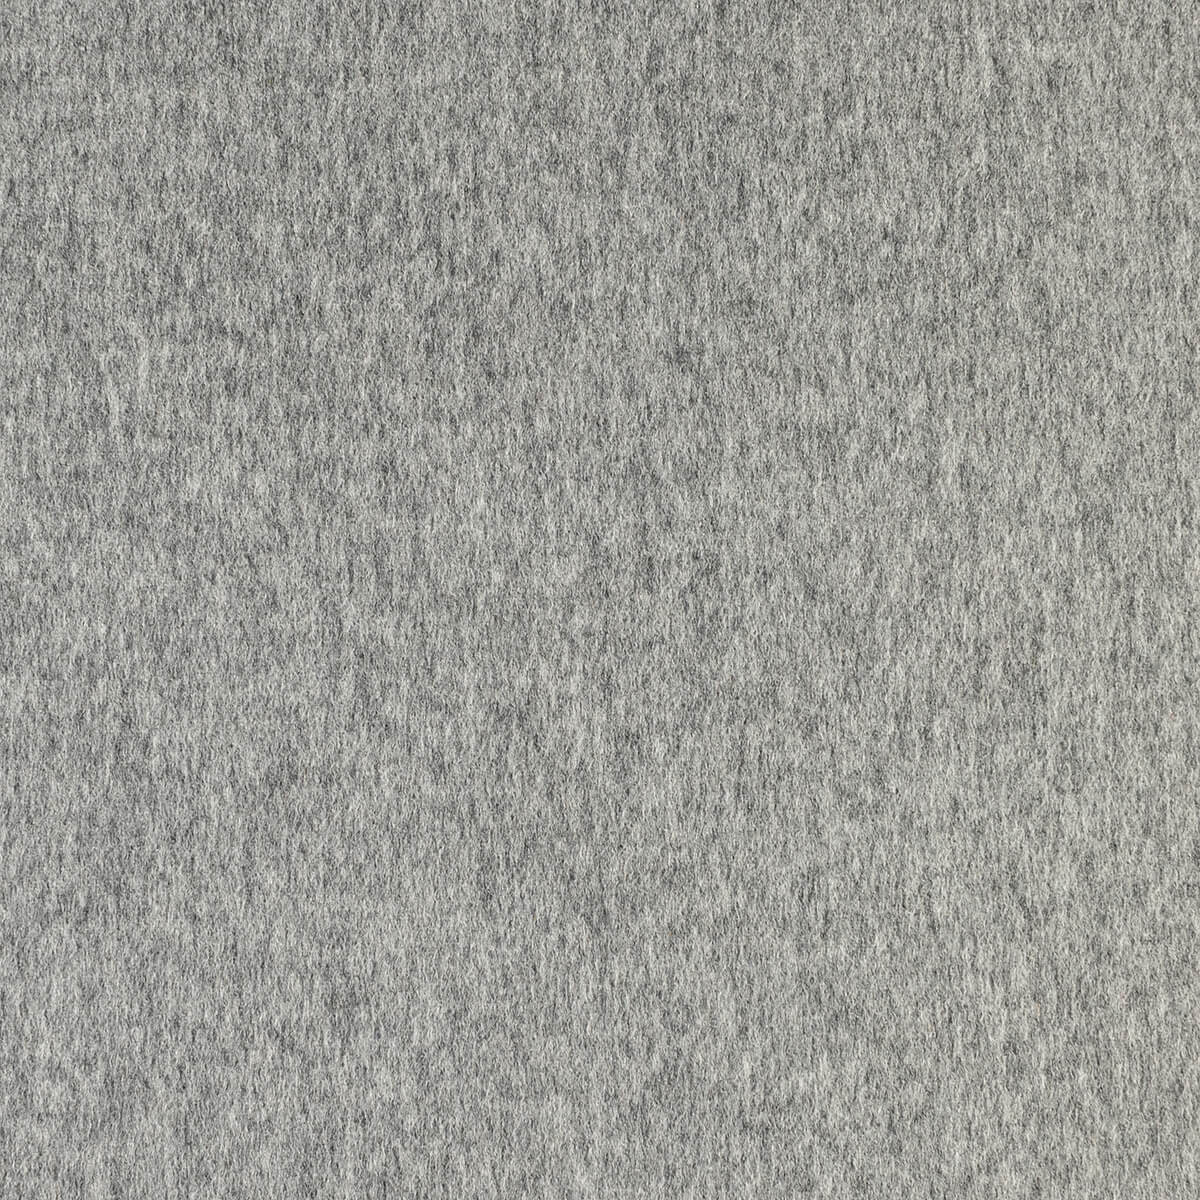 Swatch of Johnstons of Elgin Men's Cashmere Dressing Gown with Silk Lining in Light Grey on a grey background TA000472RU67840